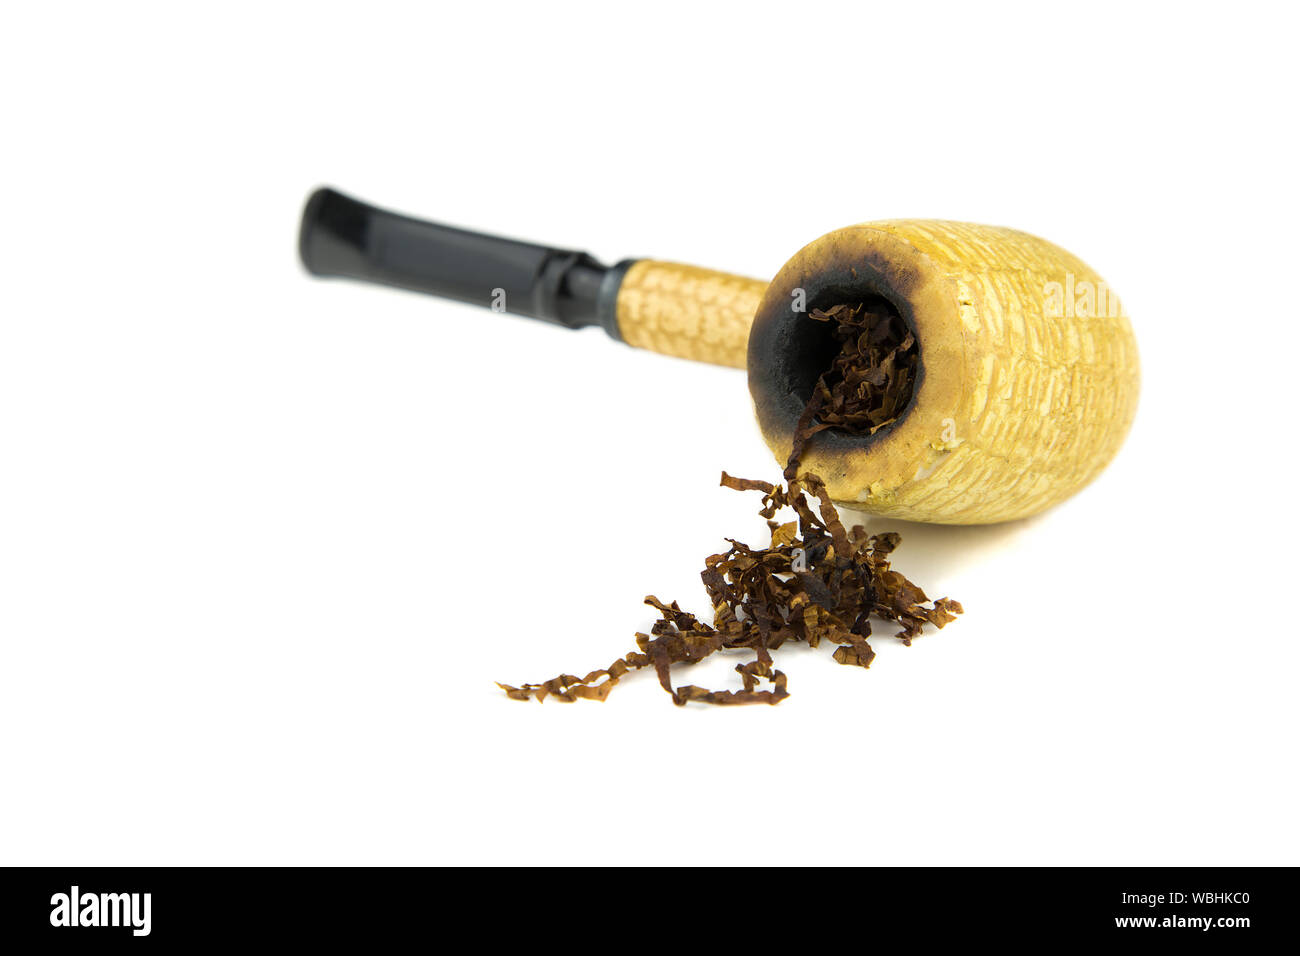 Close-up Of Smoking Pipe With Tobacco Against White Background Stock Photo